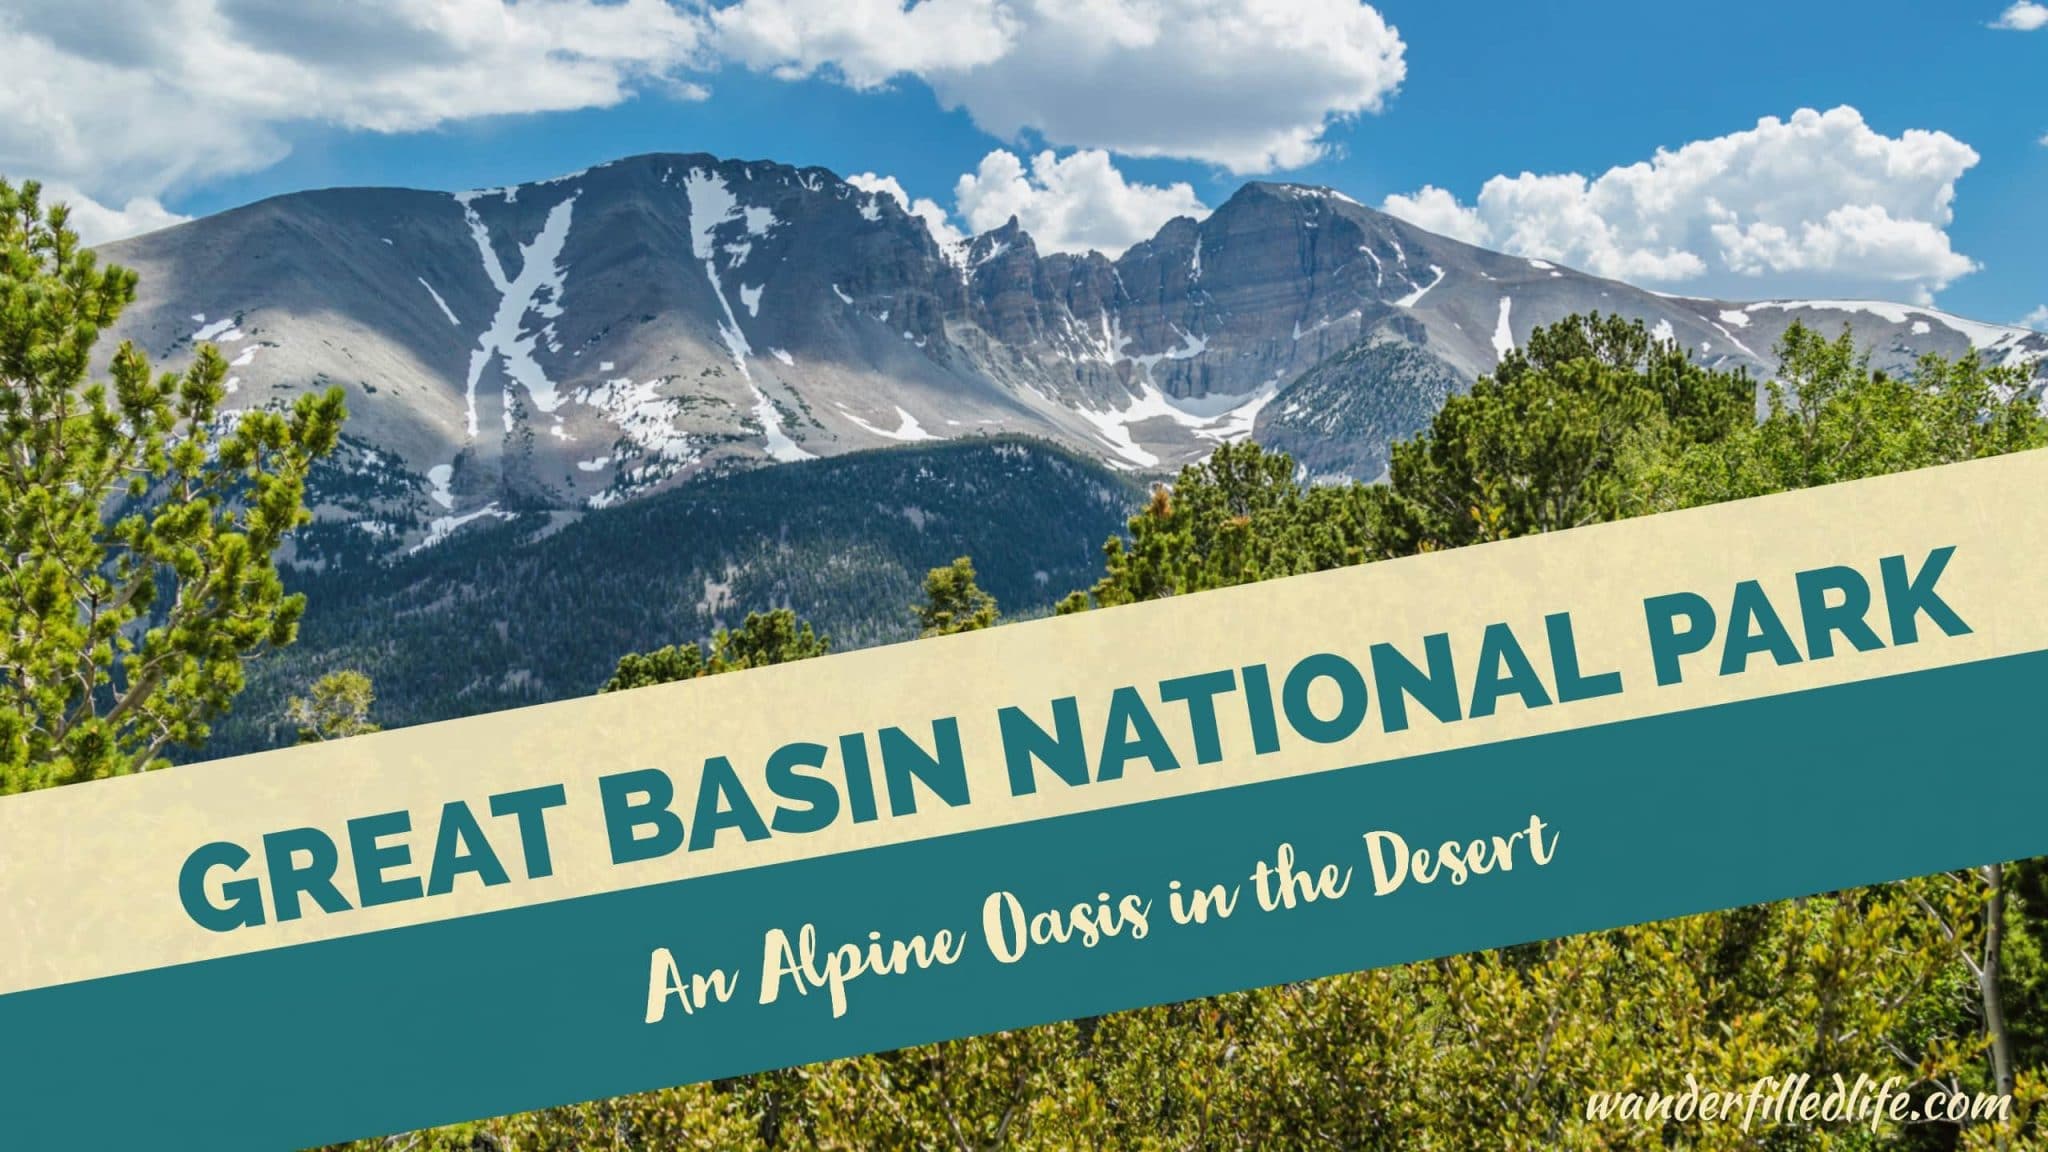 Great Basin National Park: An Alpine Oasis in the Desert